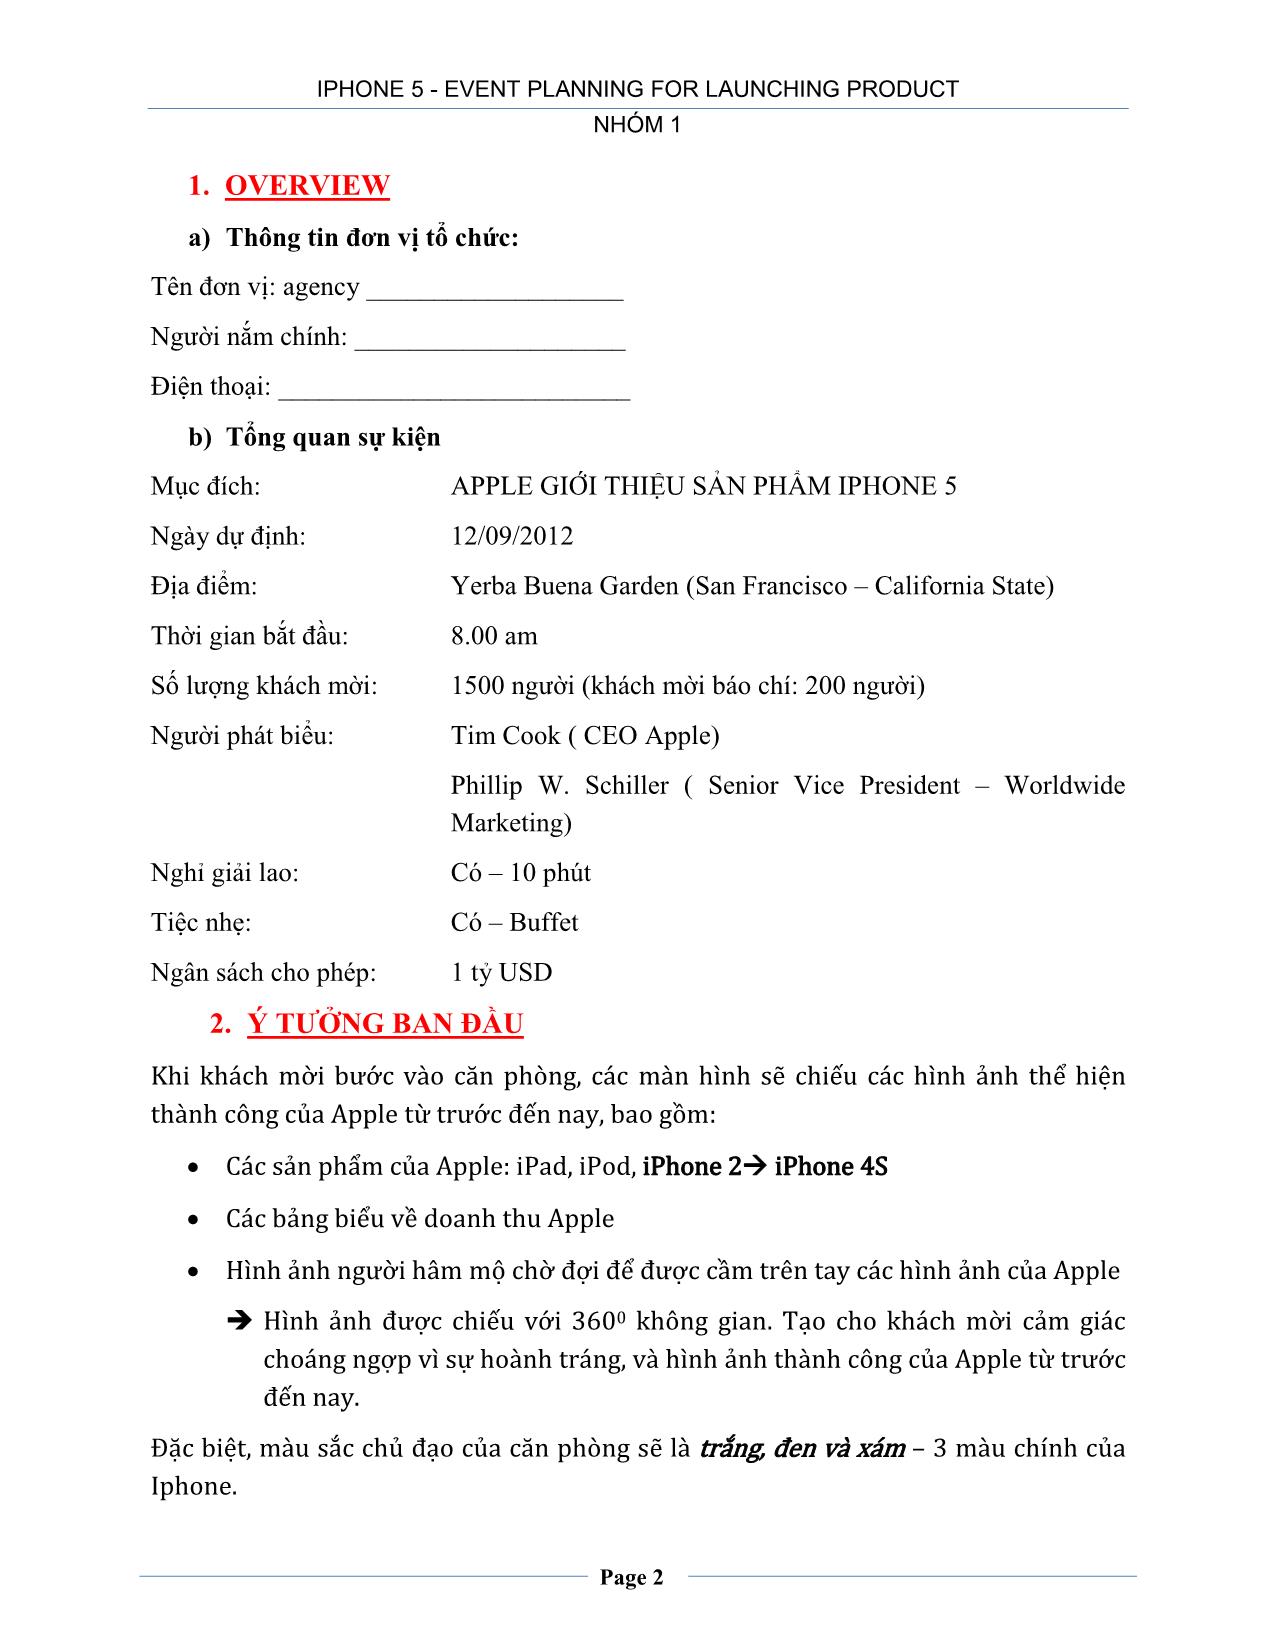 Iphone 5 - Event planning for launching product trang 3